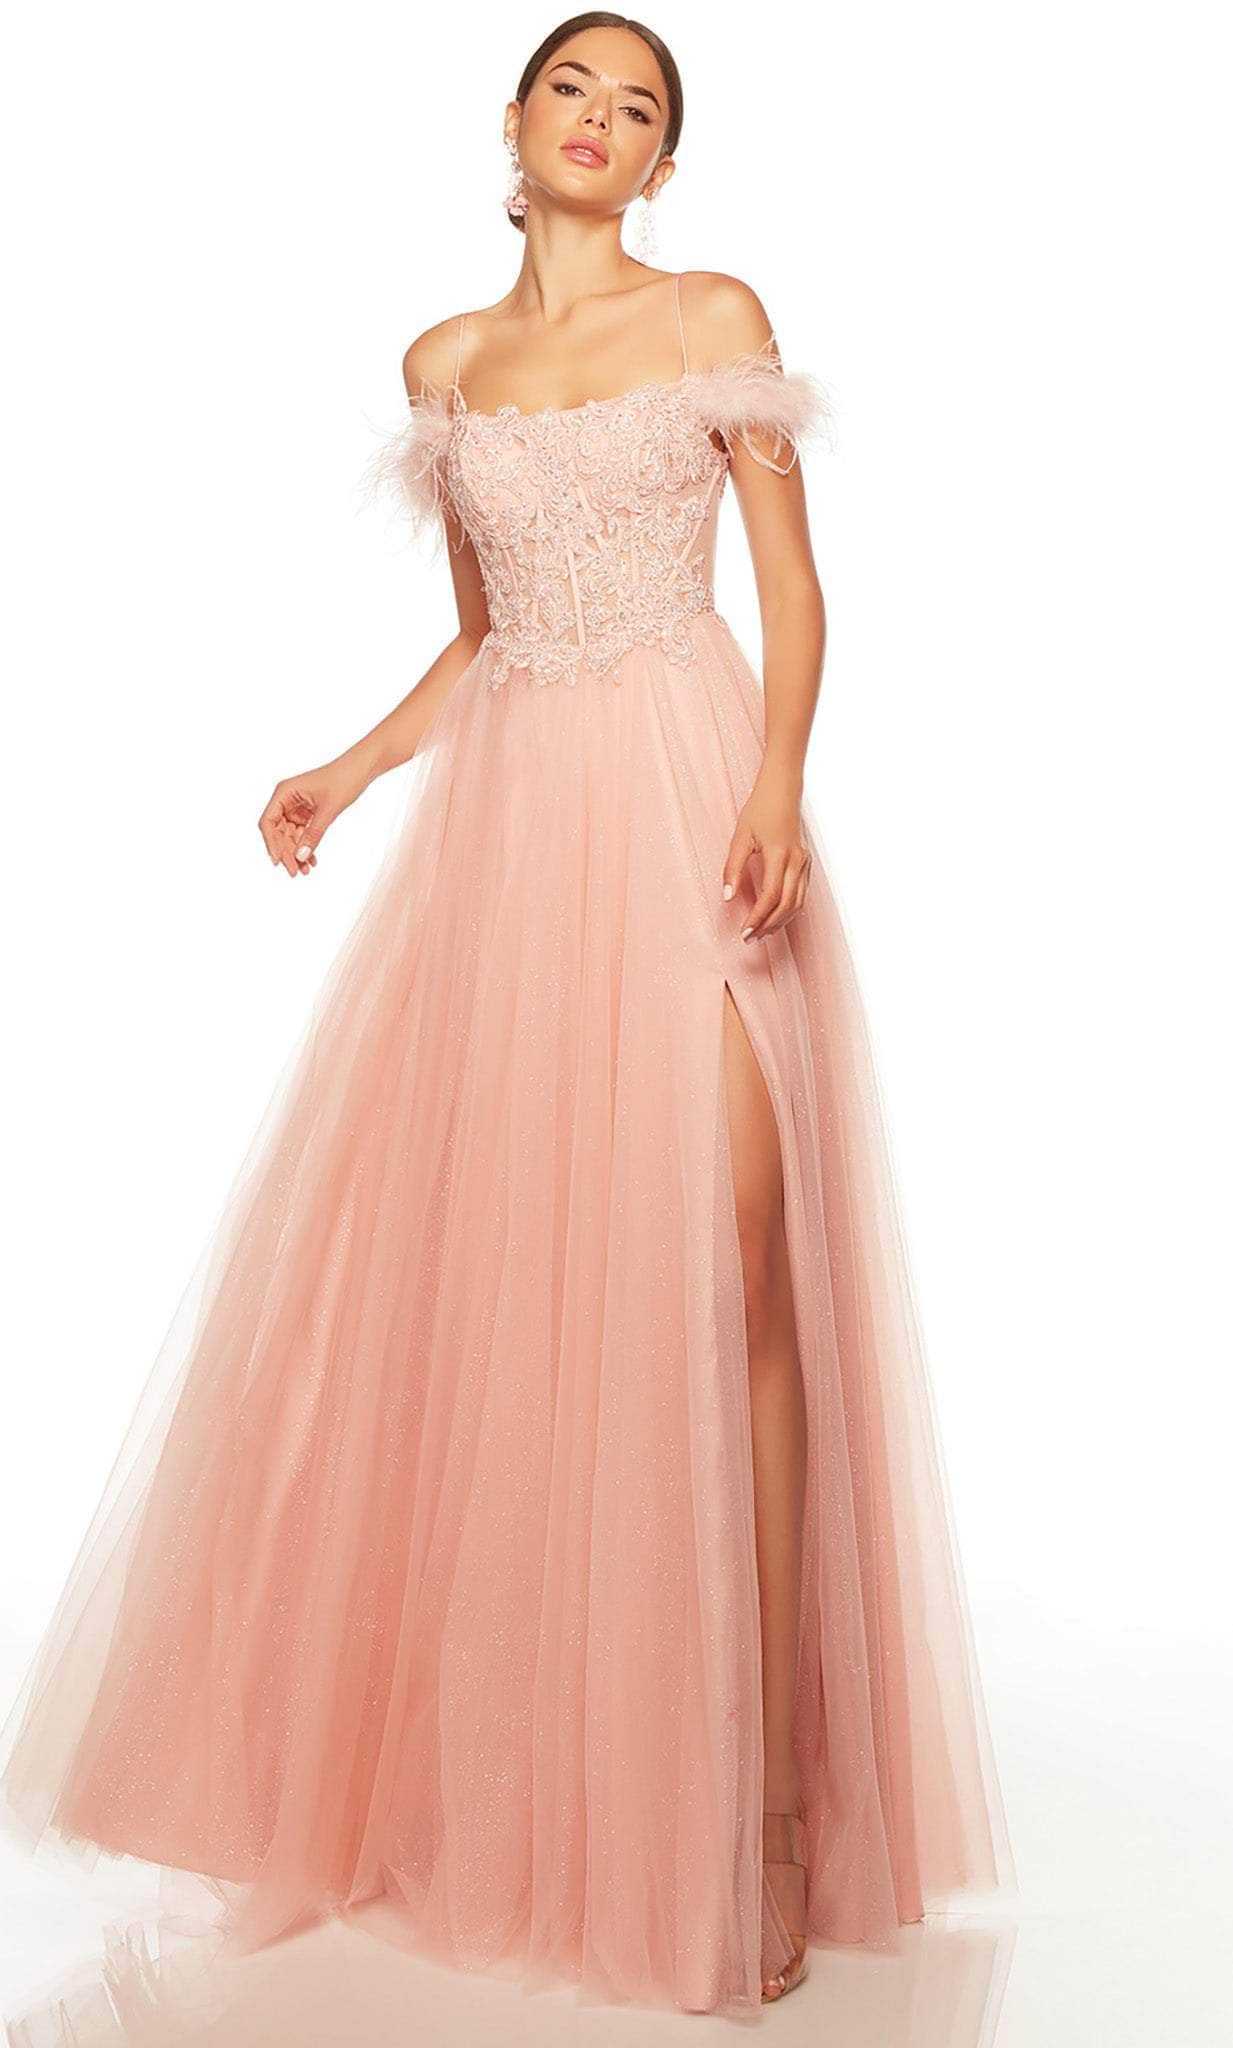 Alyce Paris 61328 - Feathered Off Shoulder Evening Gown
